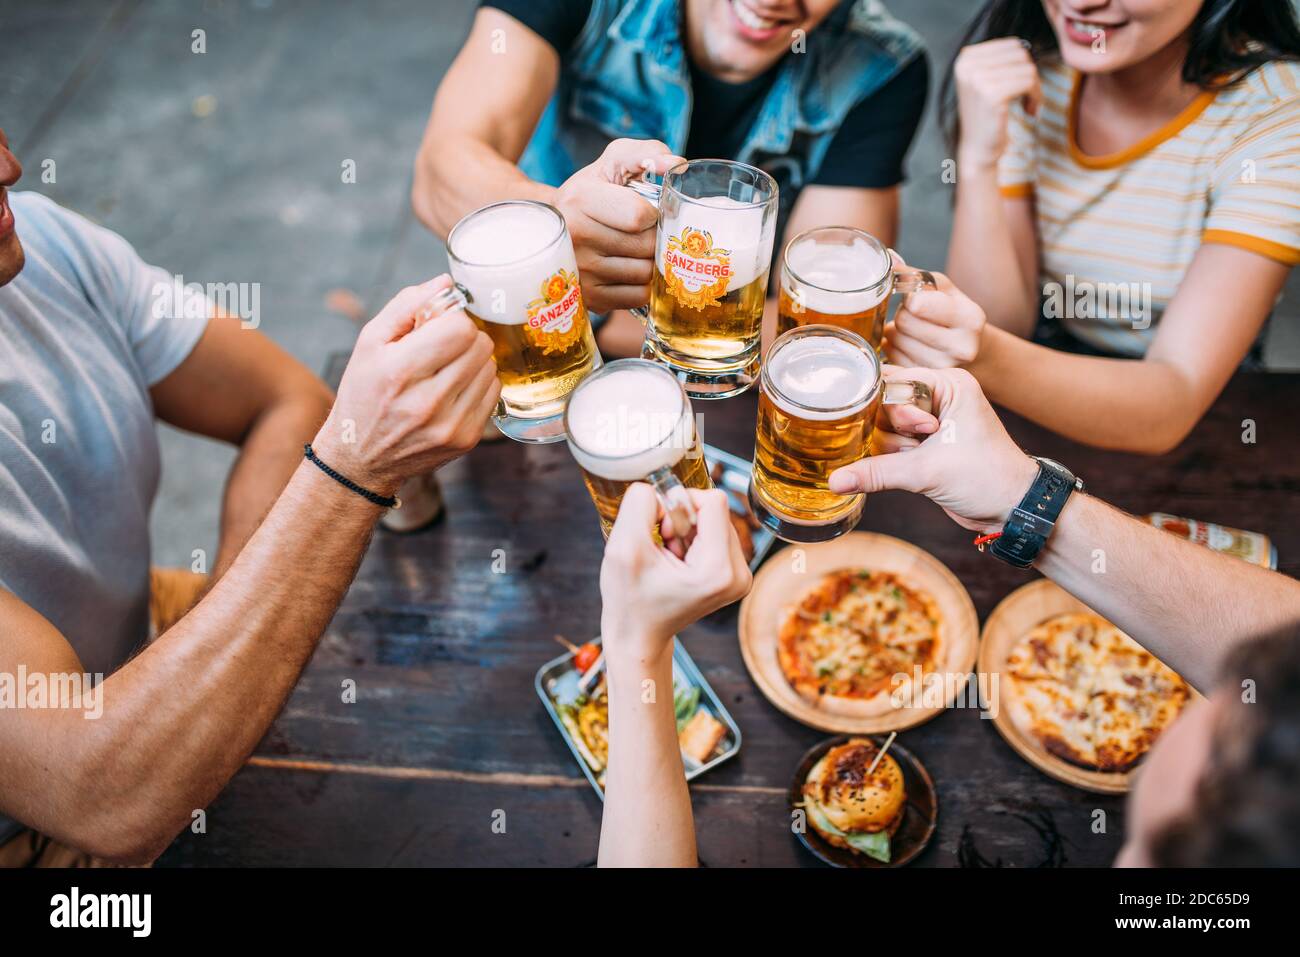 Party beer Happy friends group drinking Ganzberg beer at brewery bar restaurant Stock Photo